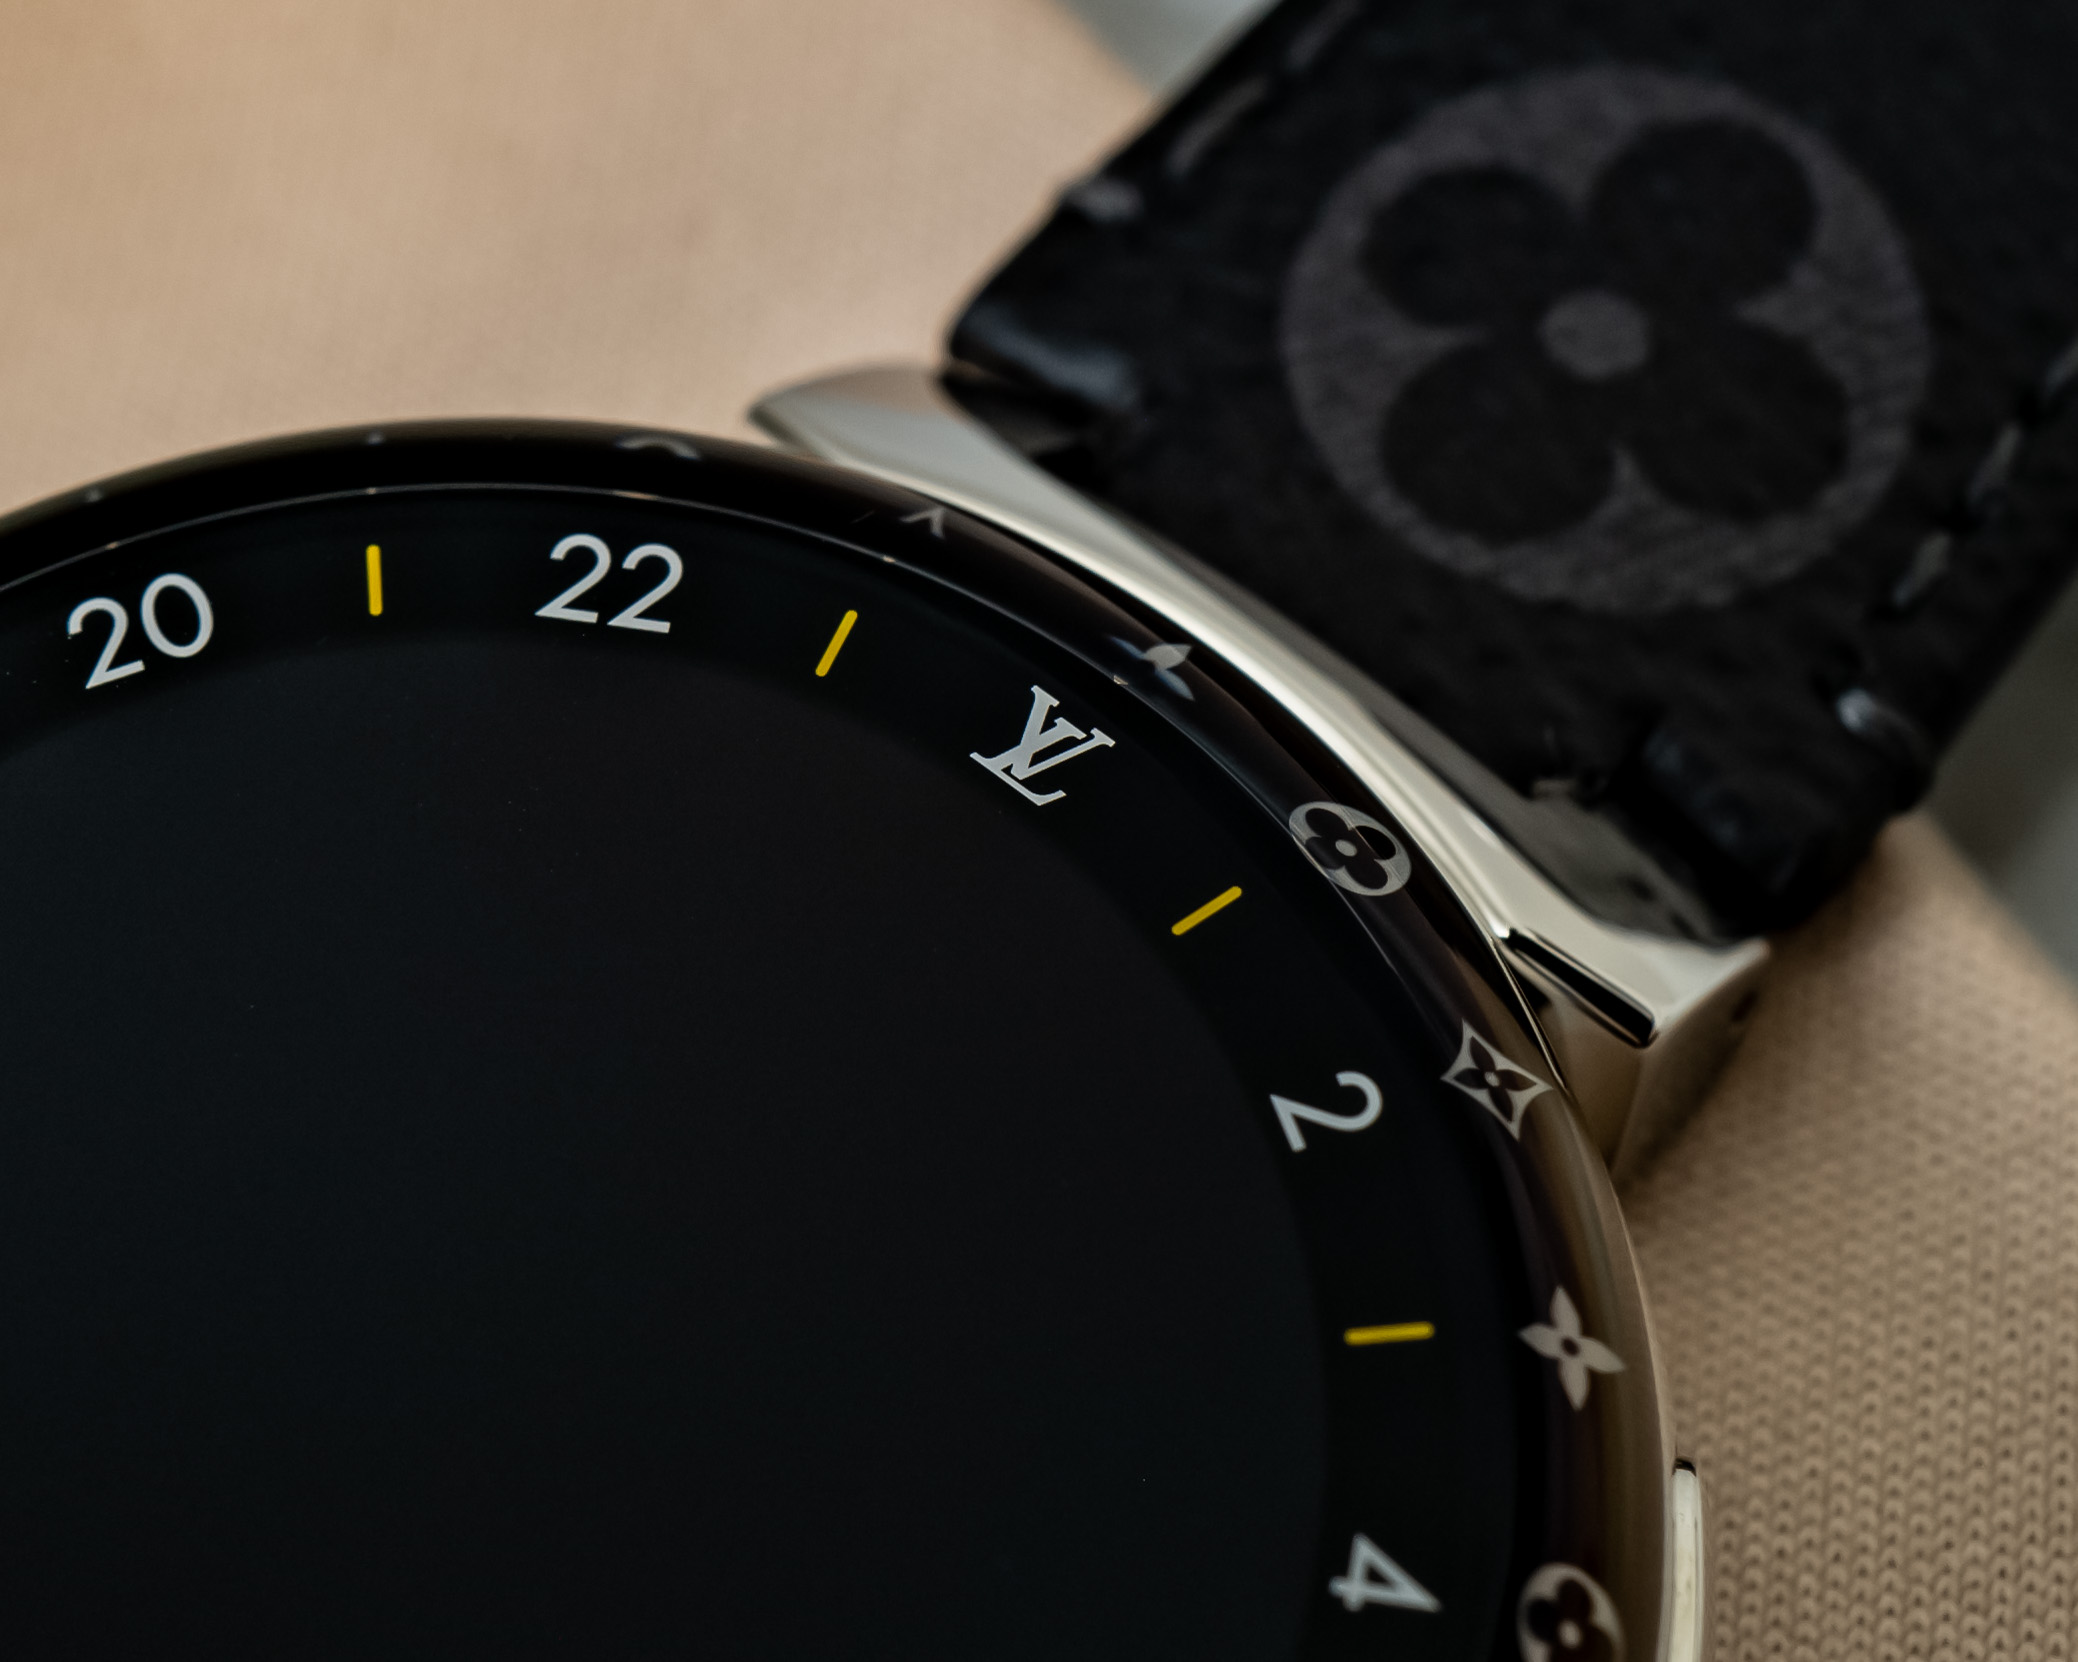 Tambour Horizon Light Up Connected Watch - Watches - Connected Watches